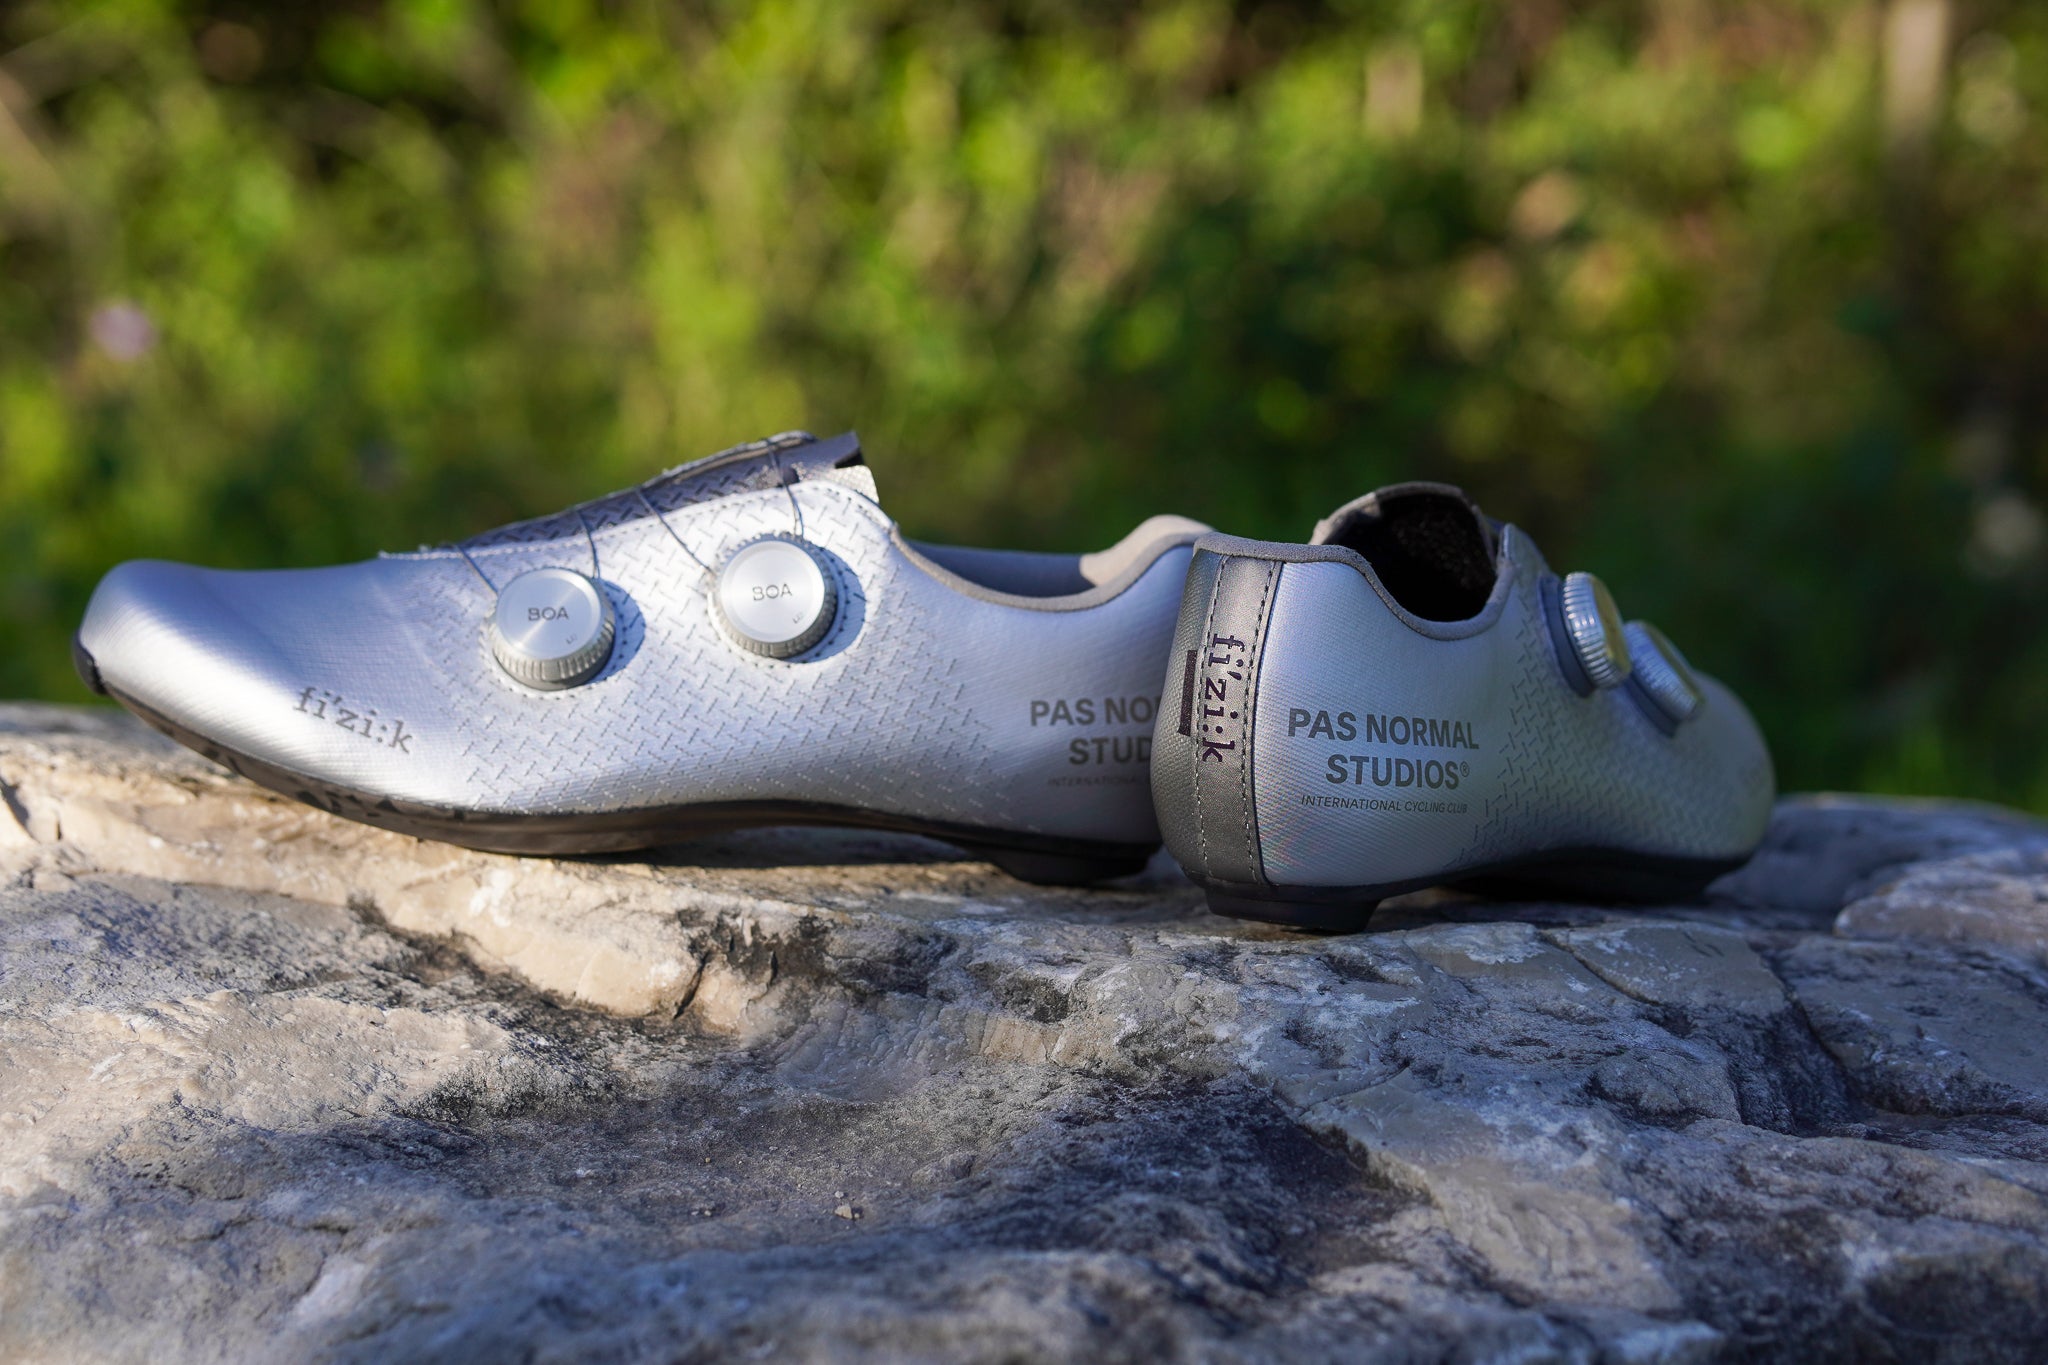 Pas Normal Collaborates with Fizik for Their Latest Road Shoe - Velo